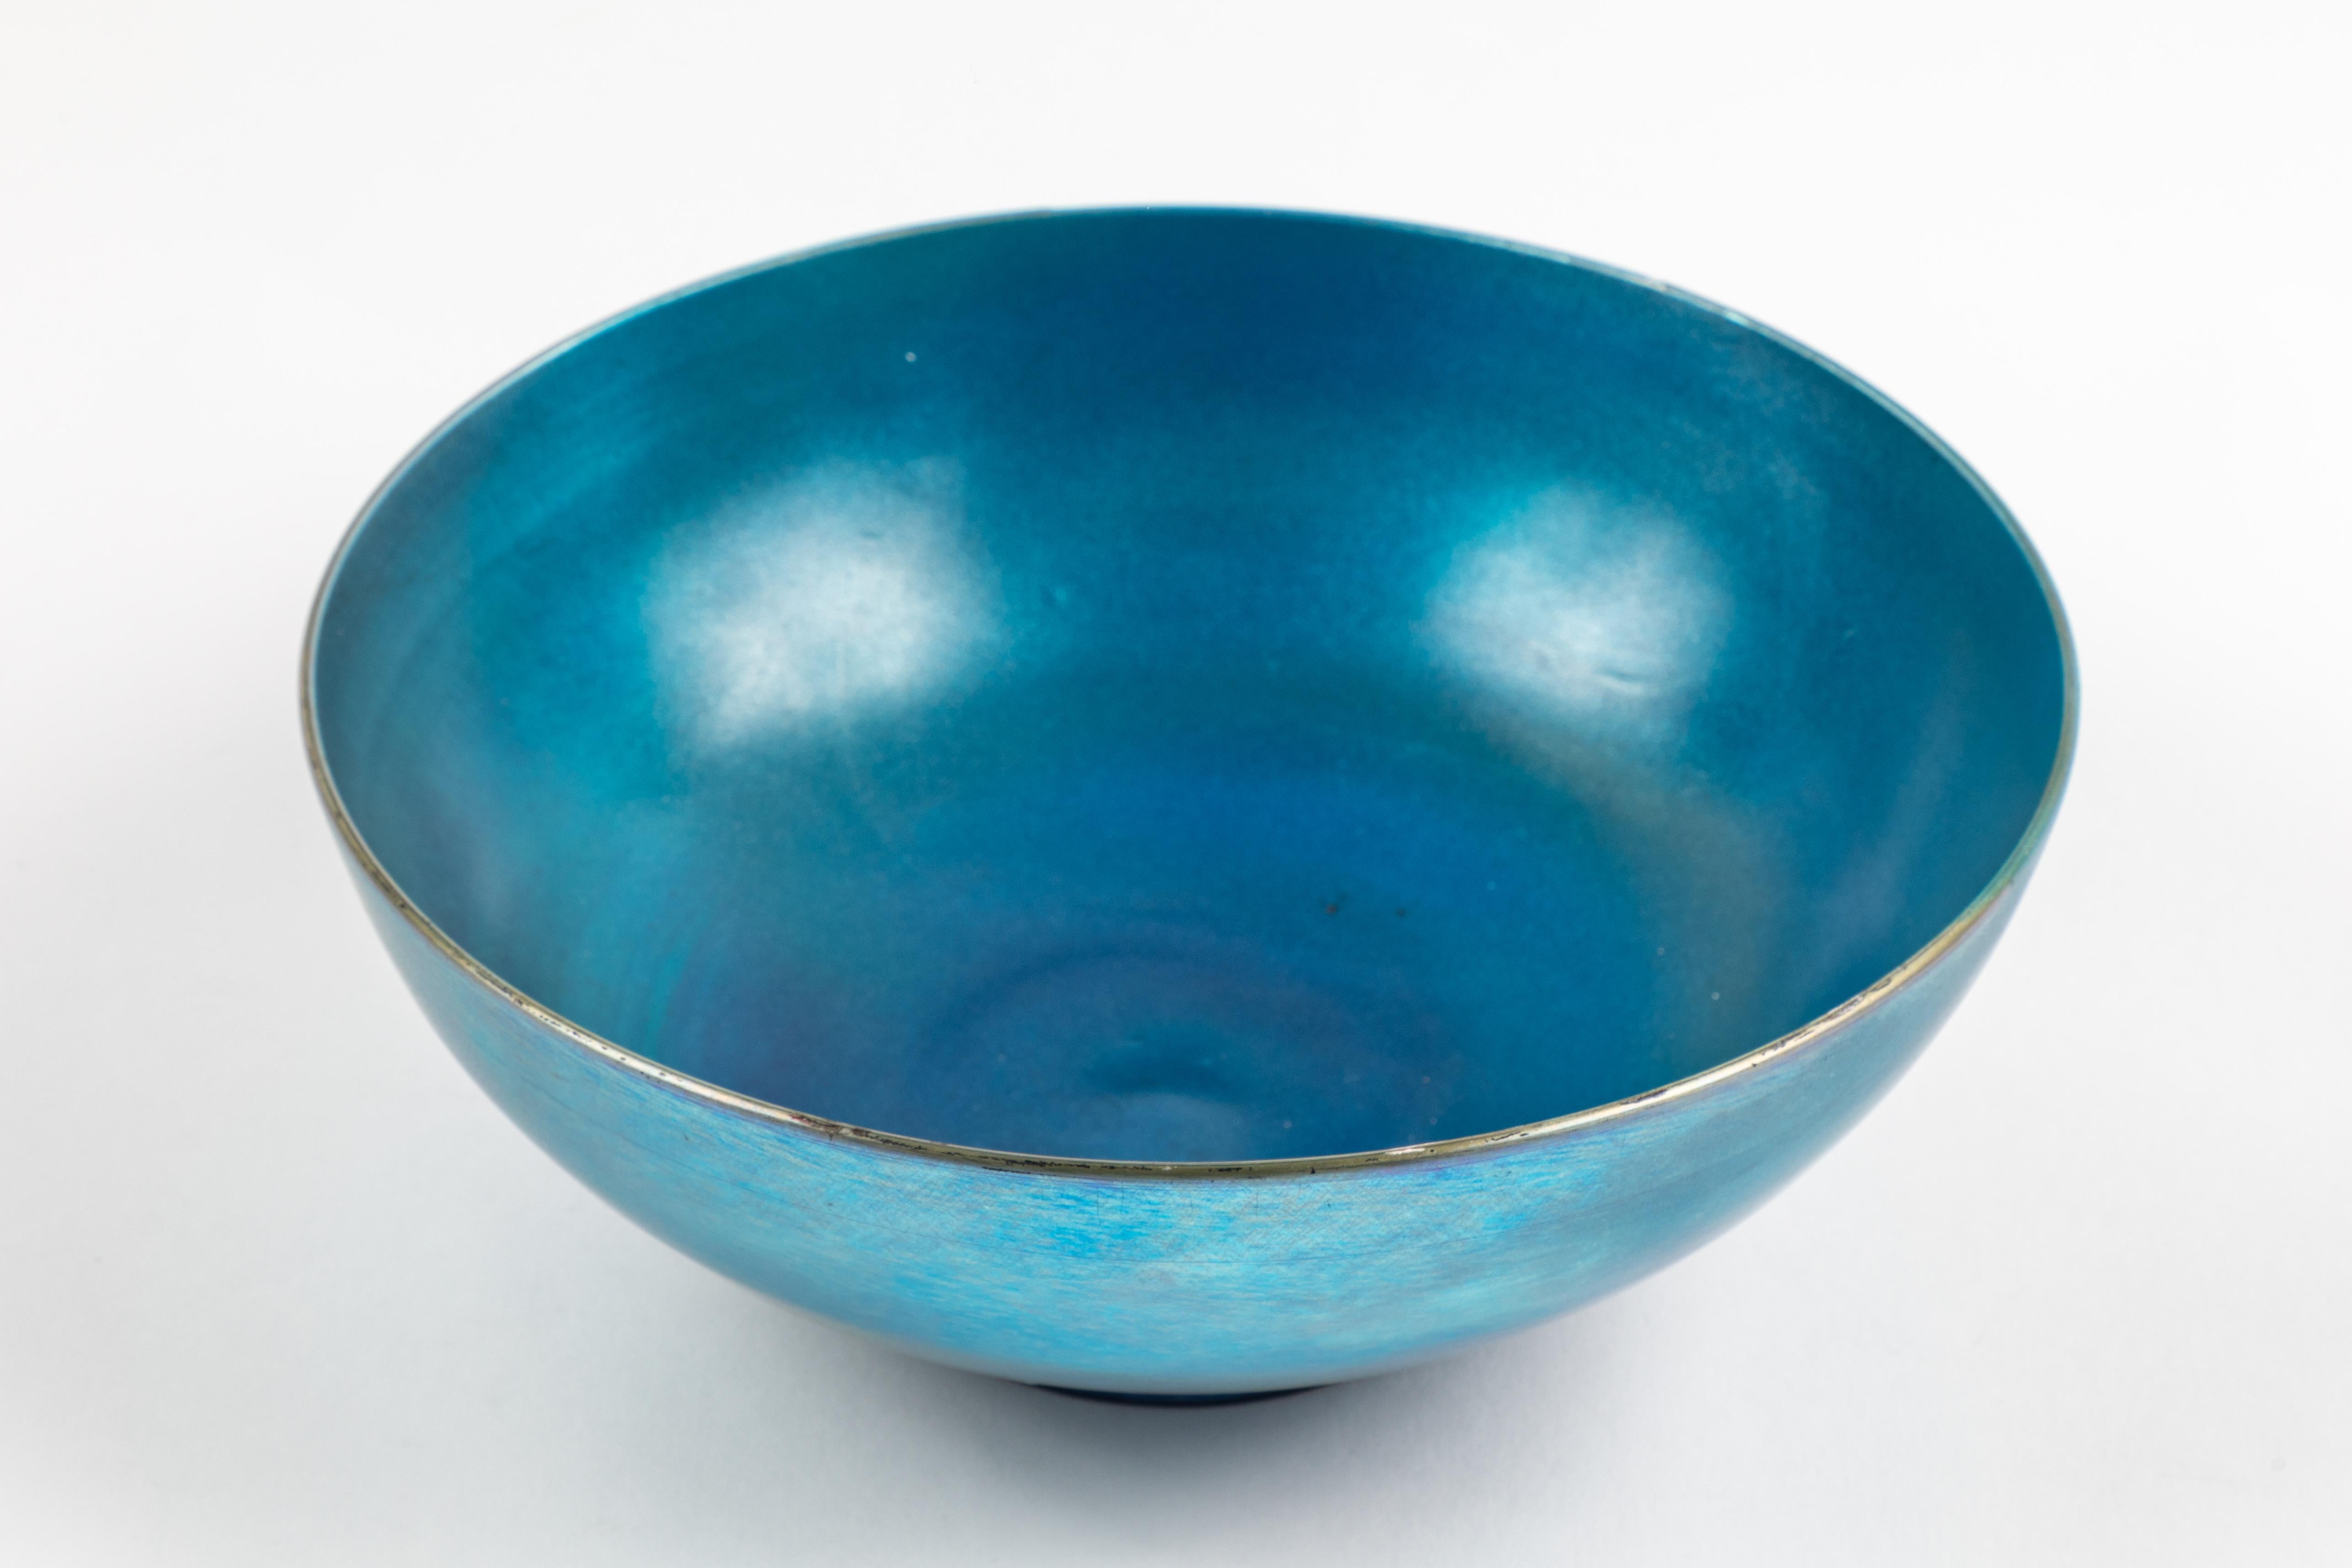 Early 20th Century Footed Blue Steuben Aurene Bowl by Frederick Carder